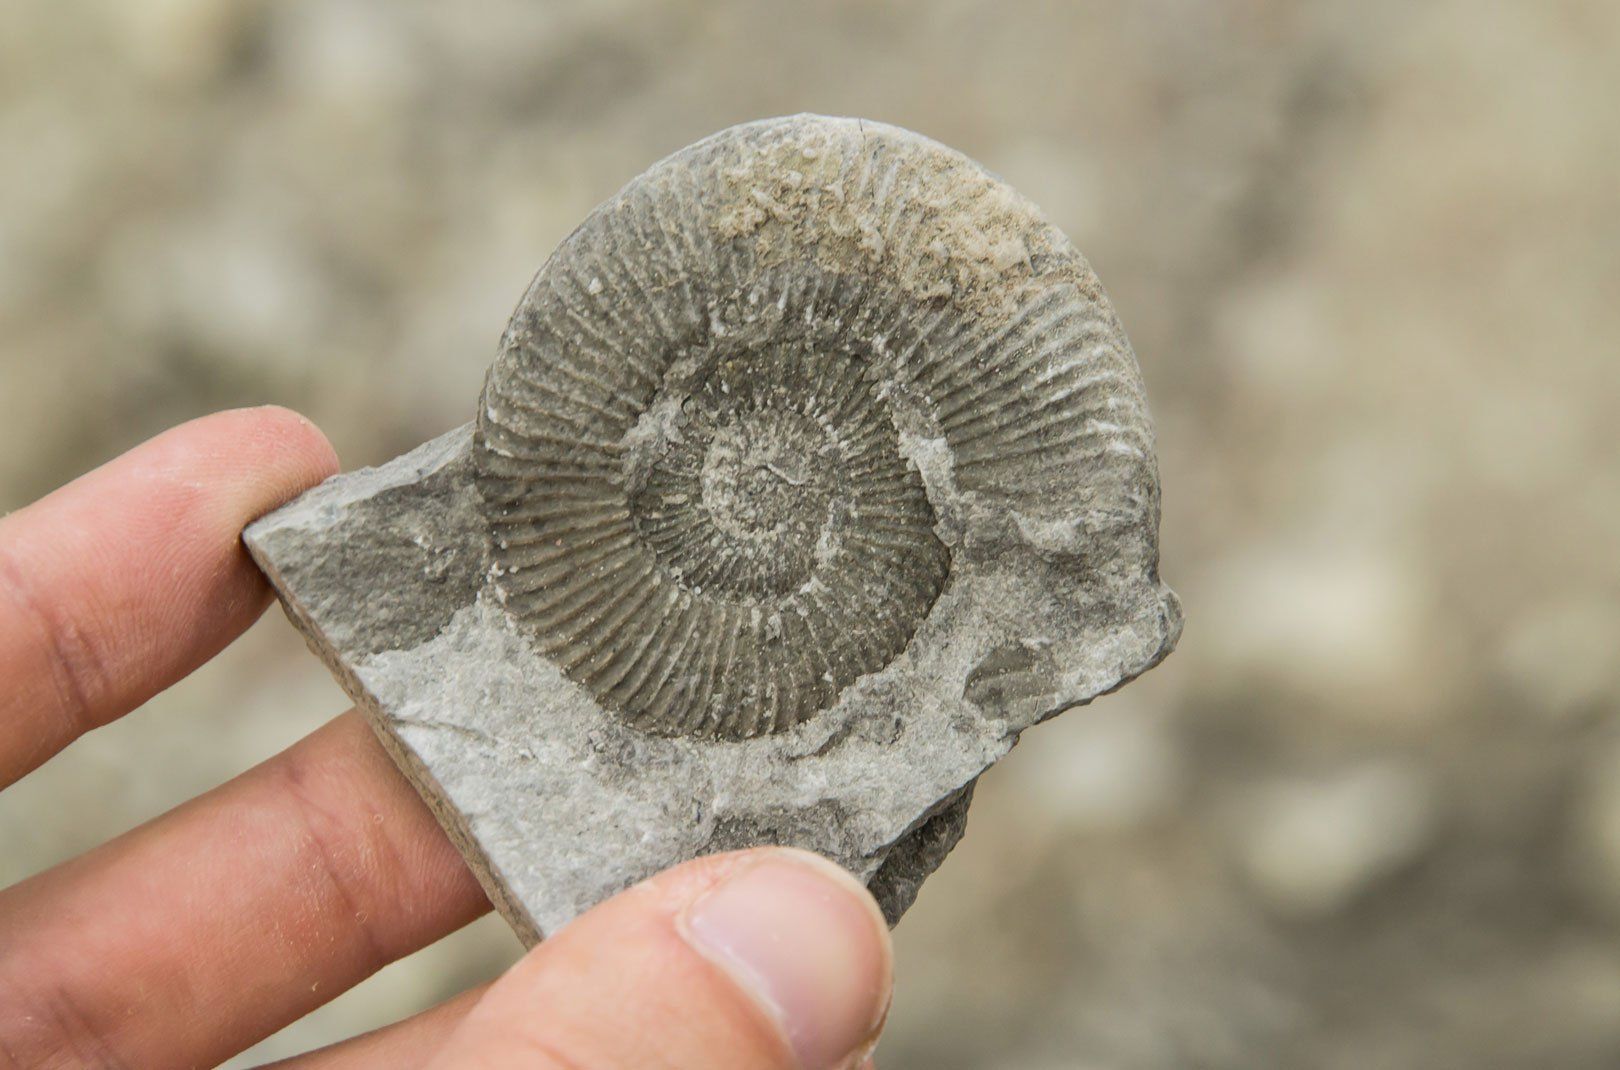 Someone holding a fossil